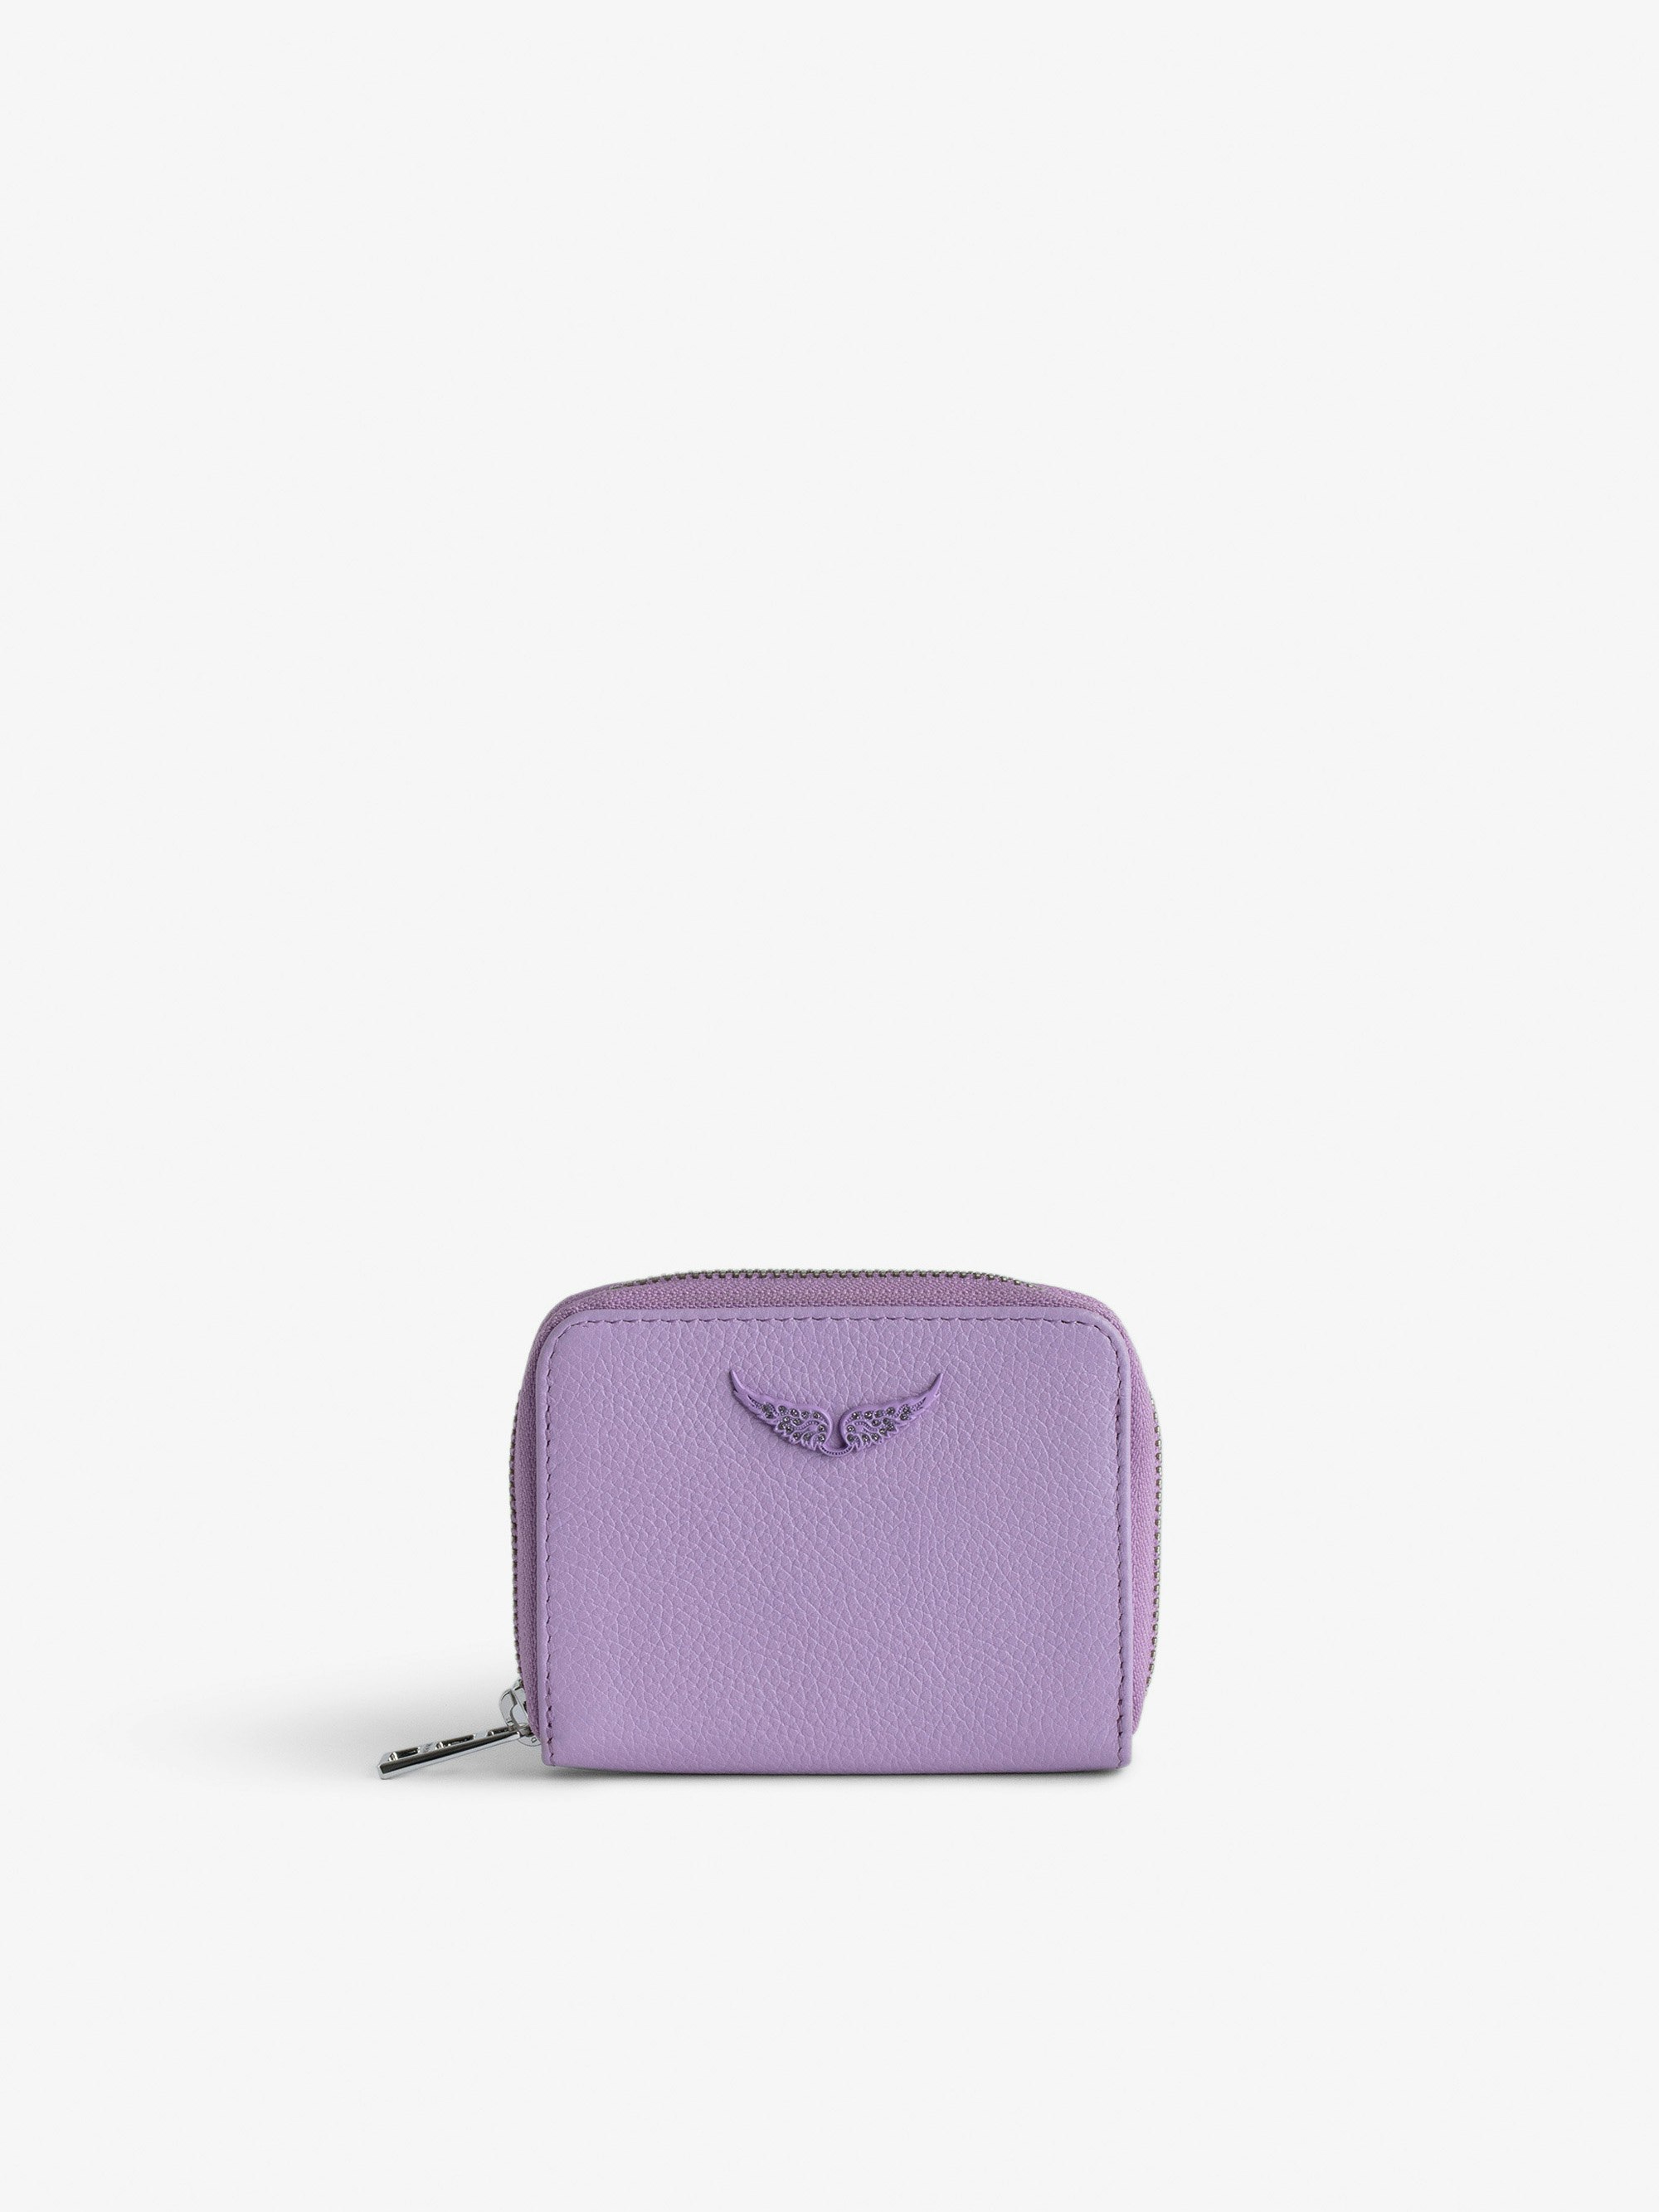 Mini ZV Coin Purse - Purple grained leather coin purse with diamanté wings charm.